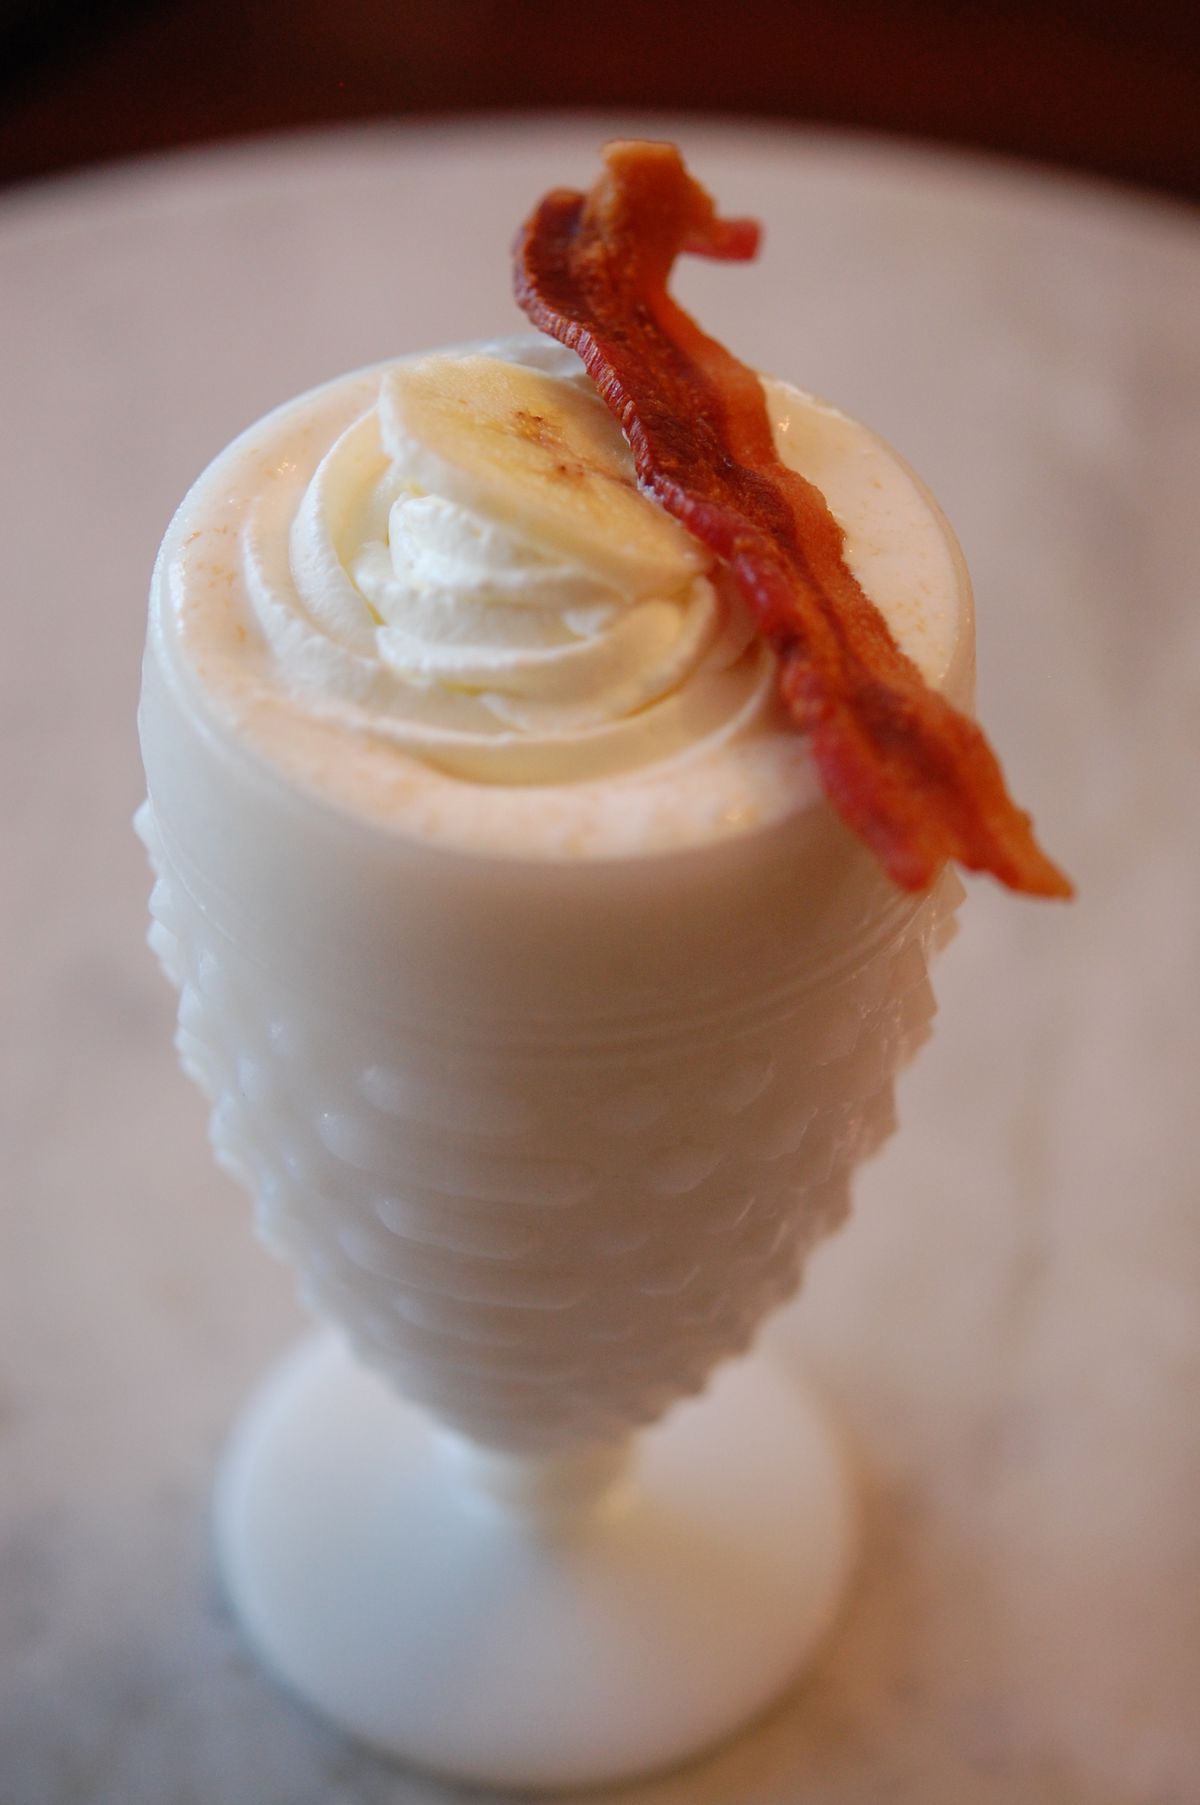 The “Elvis” in a milk glass dish made with banana pudding gelato, peanut butter, bourbon whiskey, vanilla wafers, whipped cream, and bacon